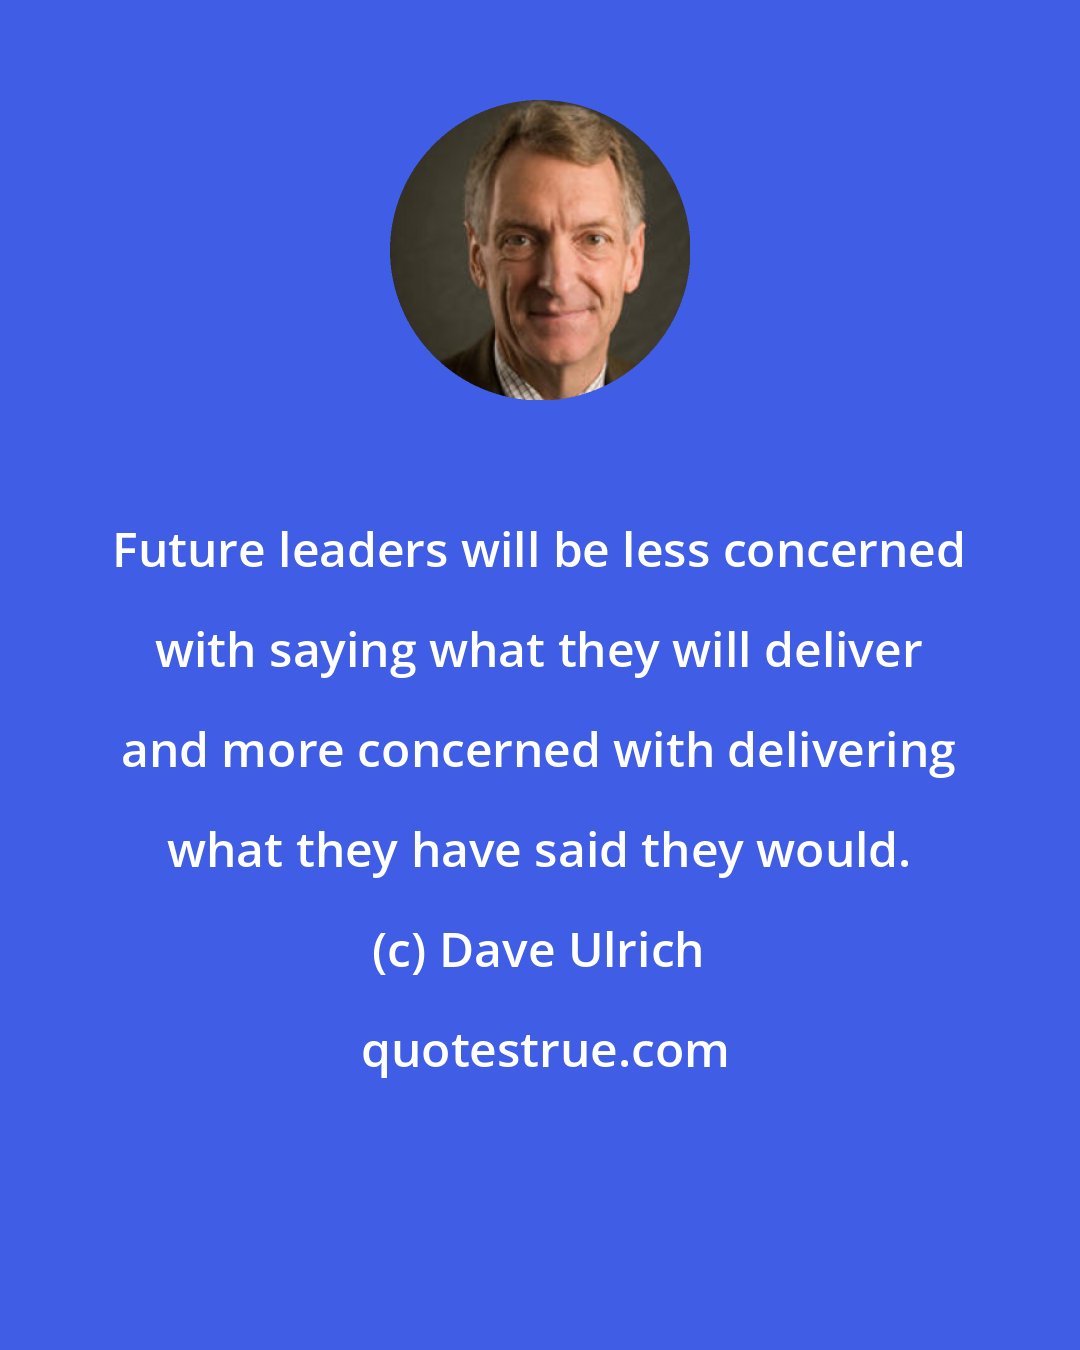 Dave Ulrich: Future leaders will be less concerned with saying what they will deliver and more concerned with delivering what they have said they would.